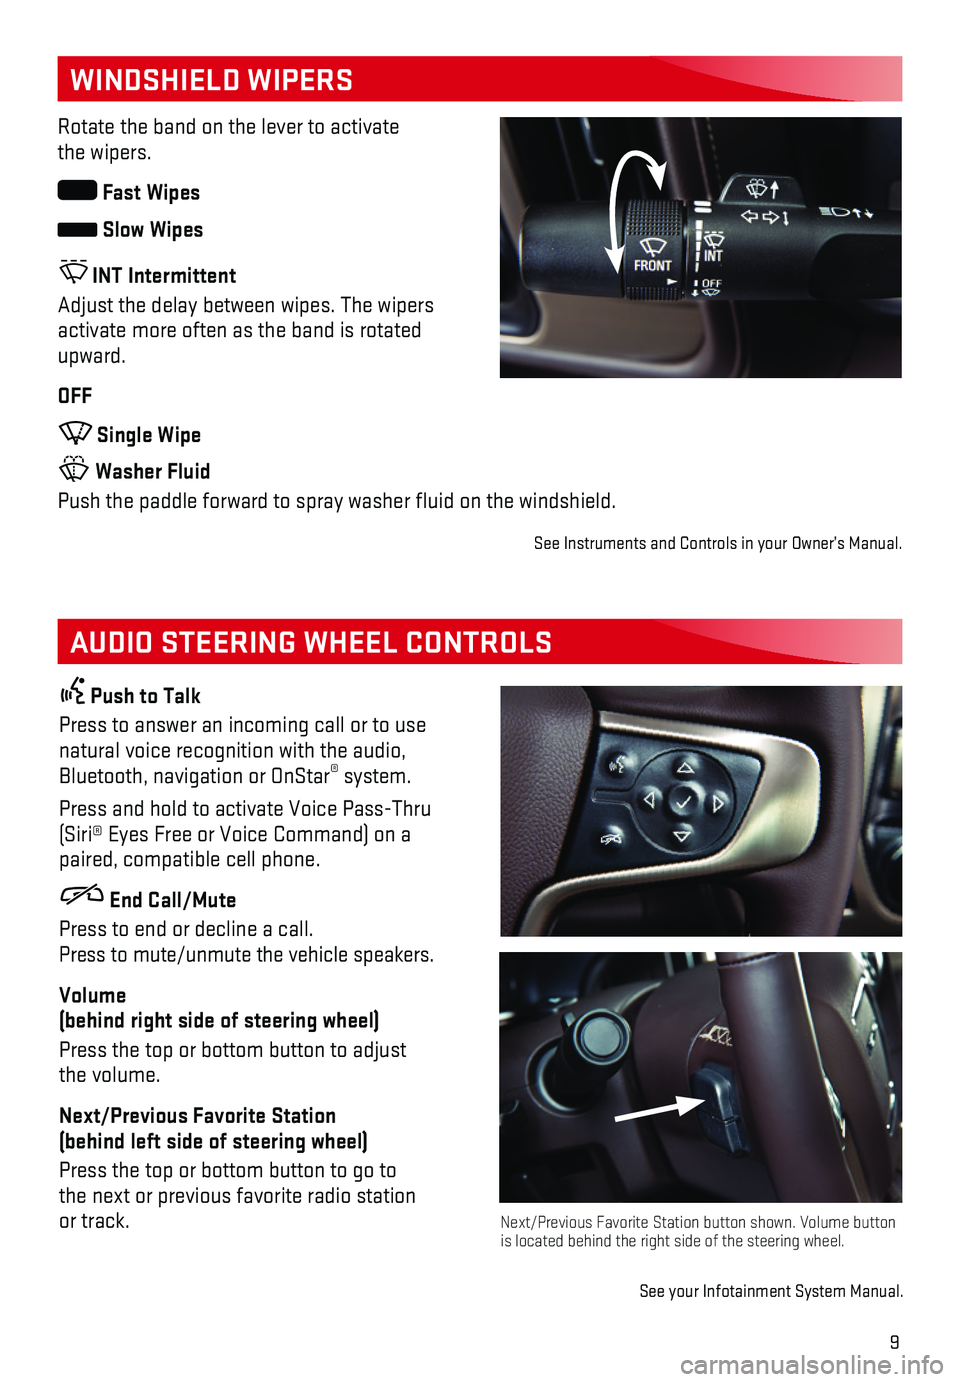 GMC SIERRA 2018  Get To Know Guide 9
WINDSHIELD WIPERS
AUDIO STEERING WHEEL CONTROLS
Rotate the band on the lever to activate the wipers.
 Fast Wipes
 Slow Wipes 
 INT Intermittent
Adjust the delay between wipes. The  wipers activate 